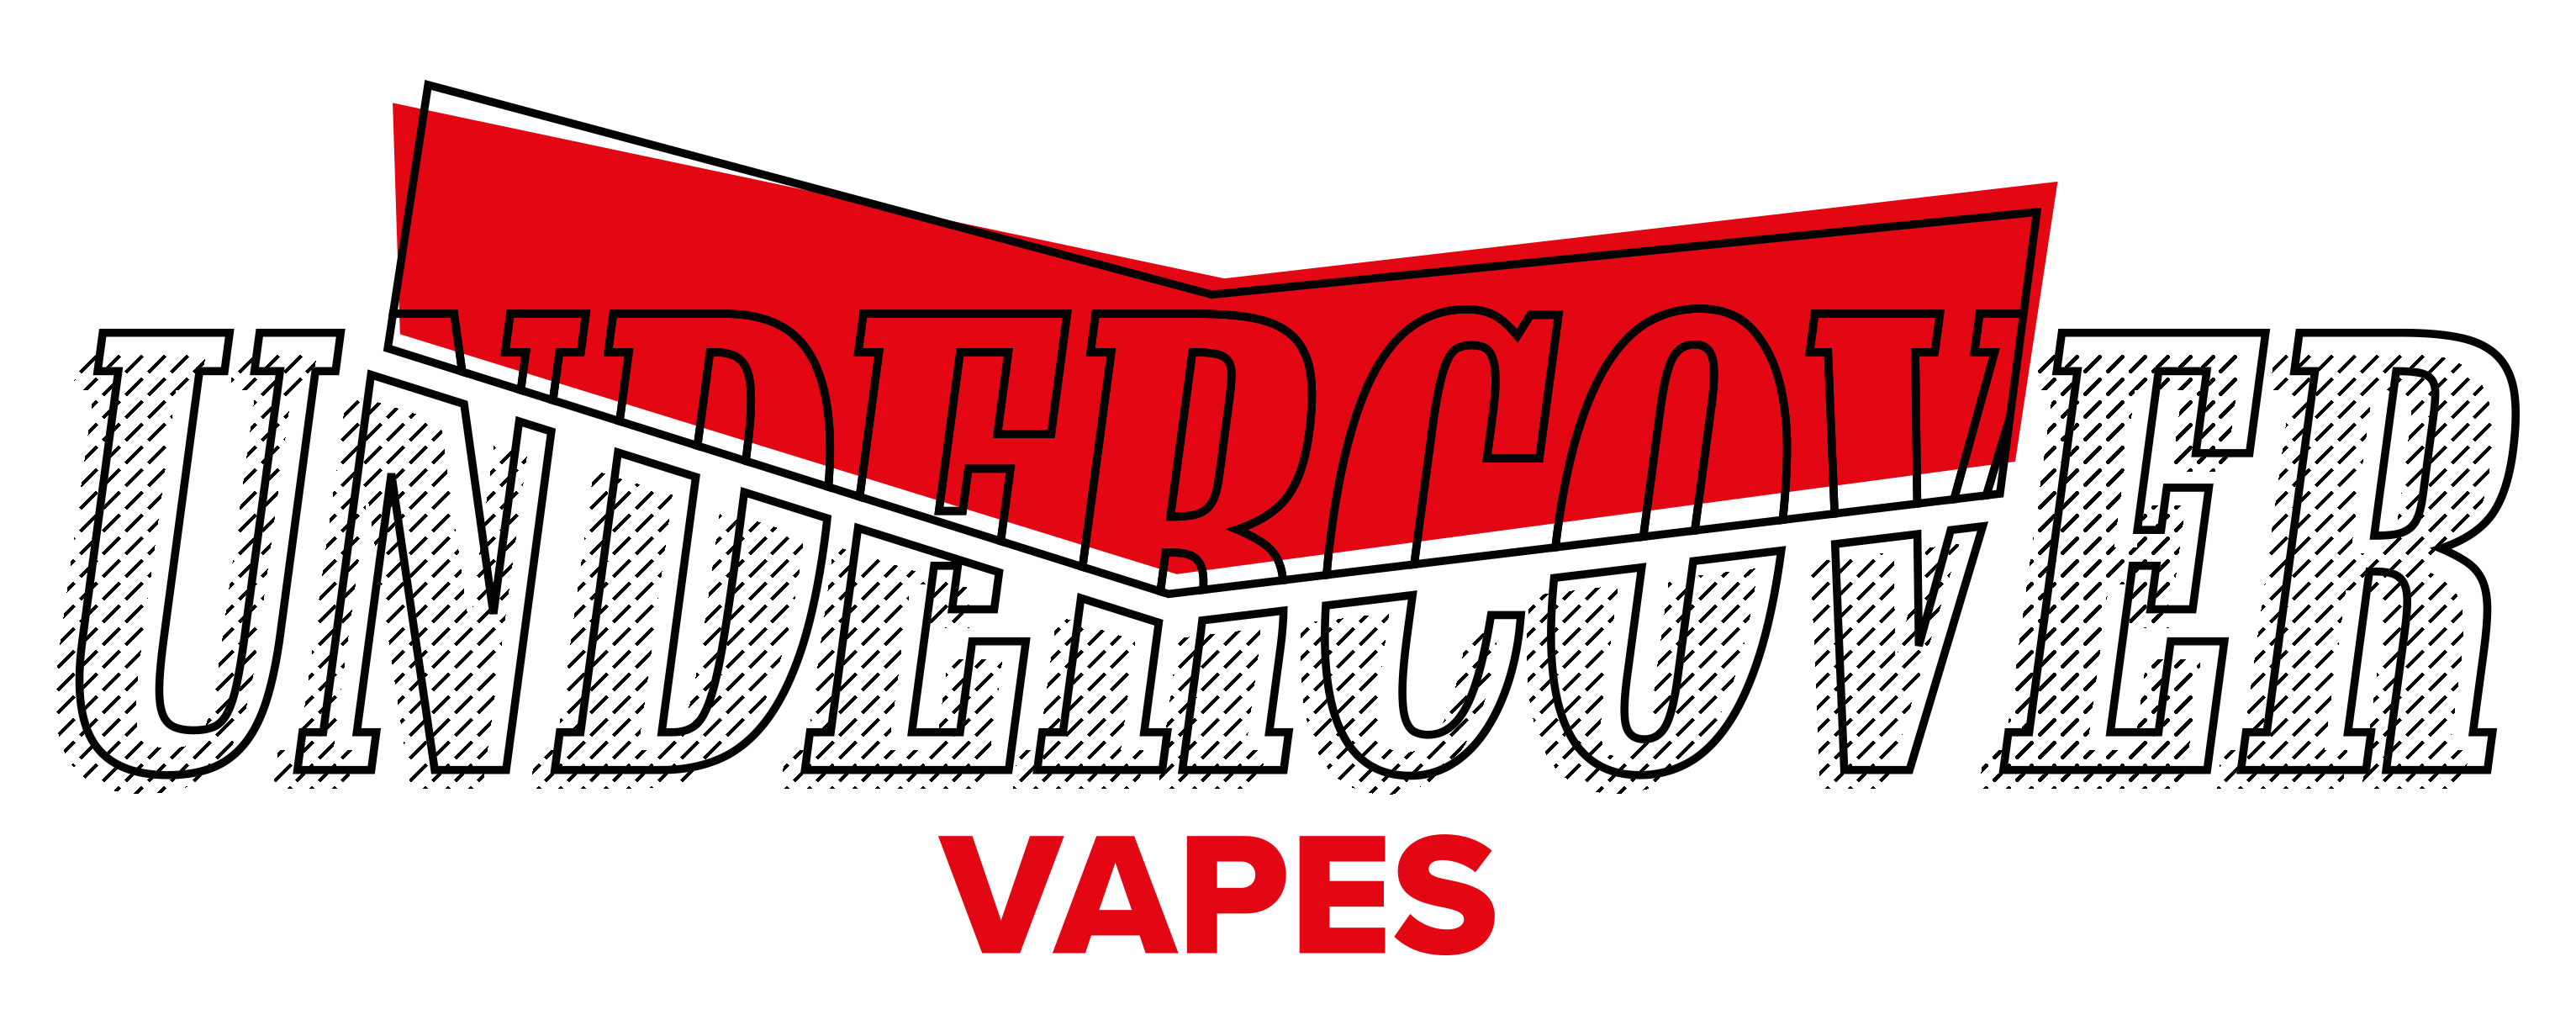 Undercover Vapes